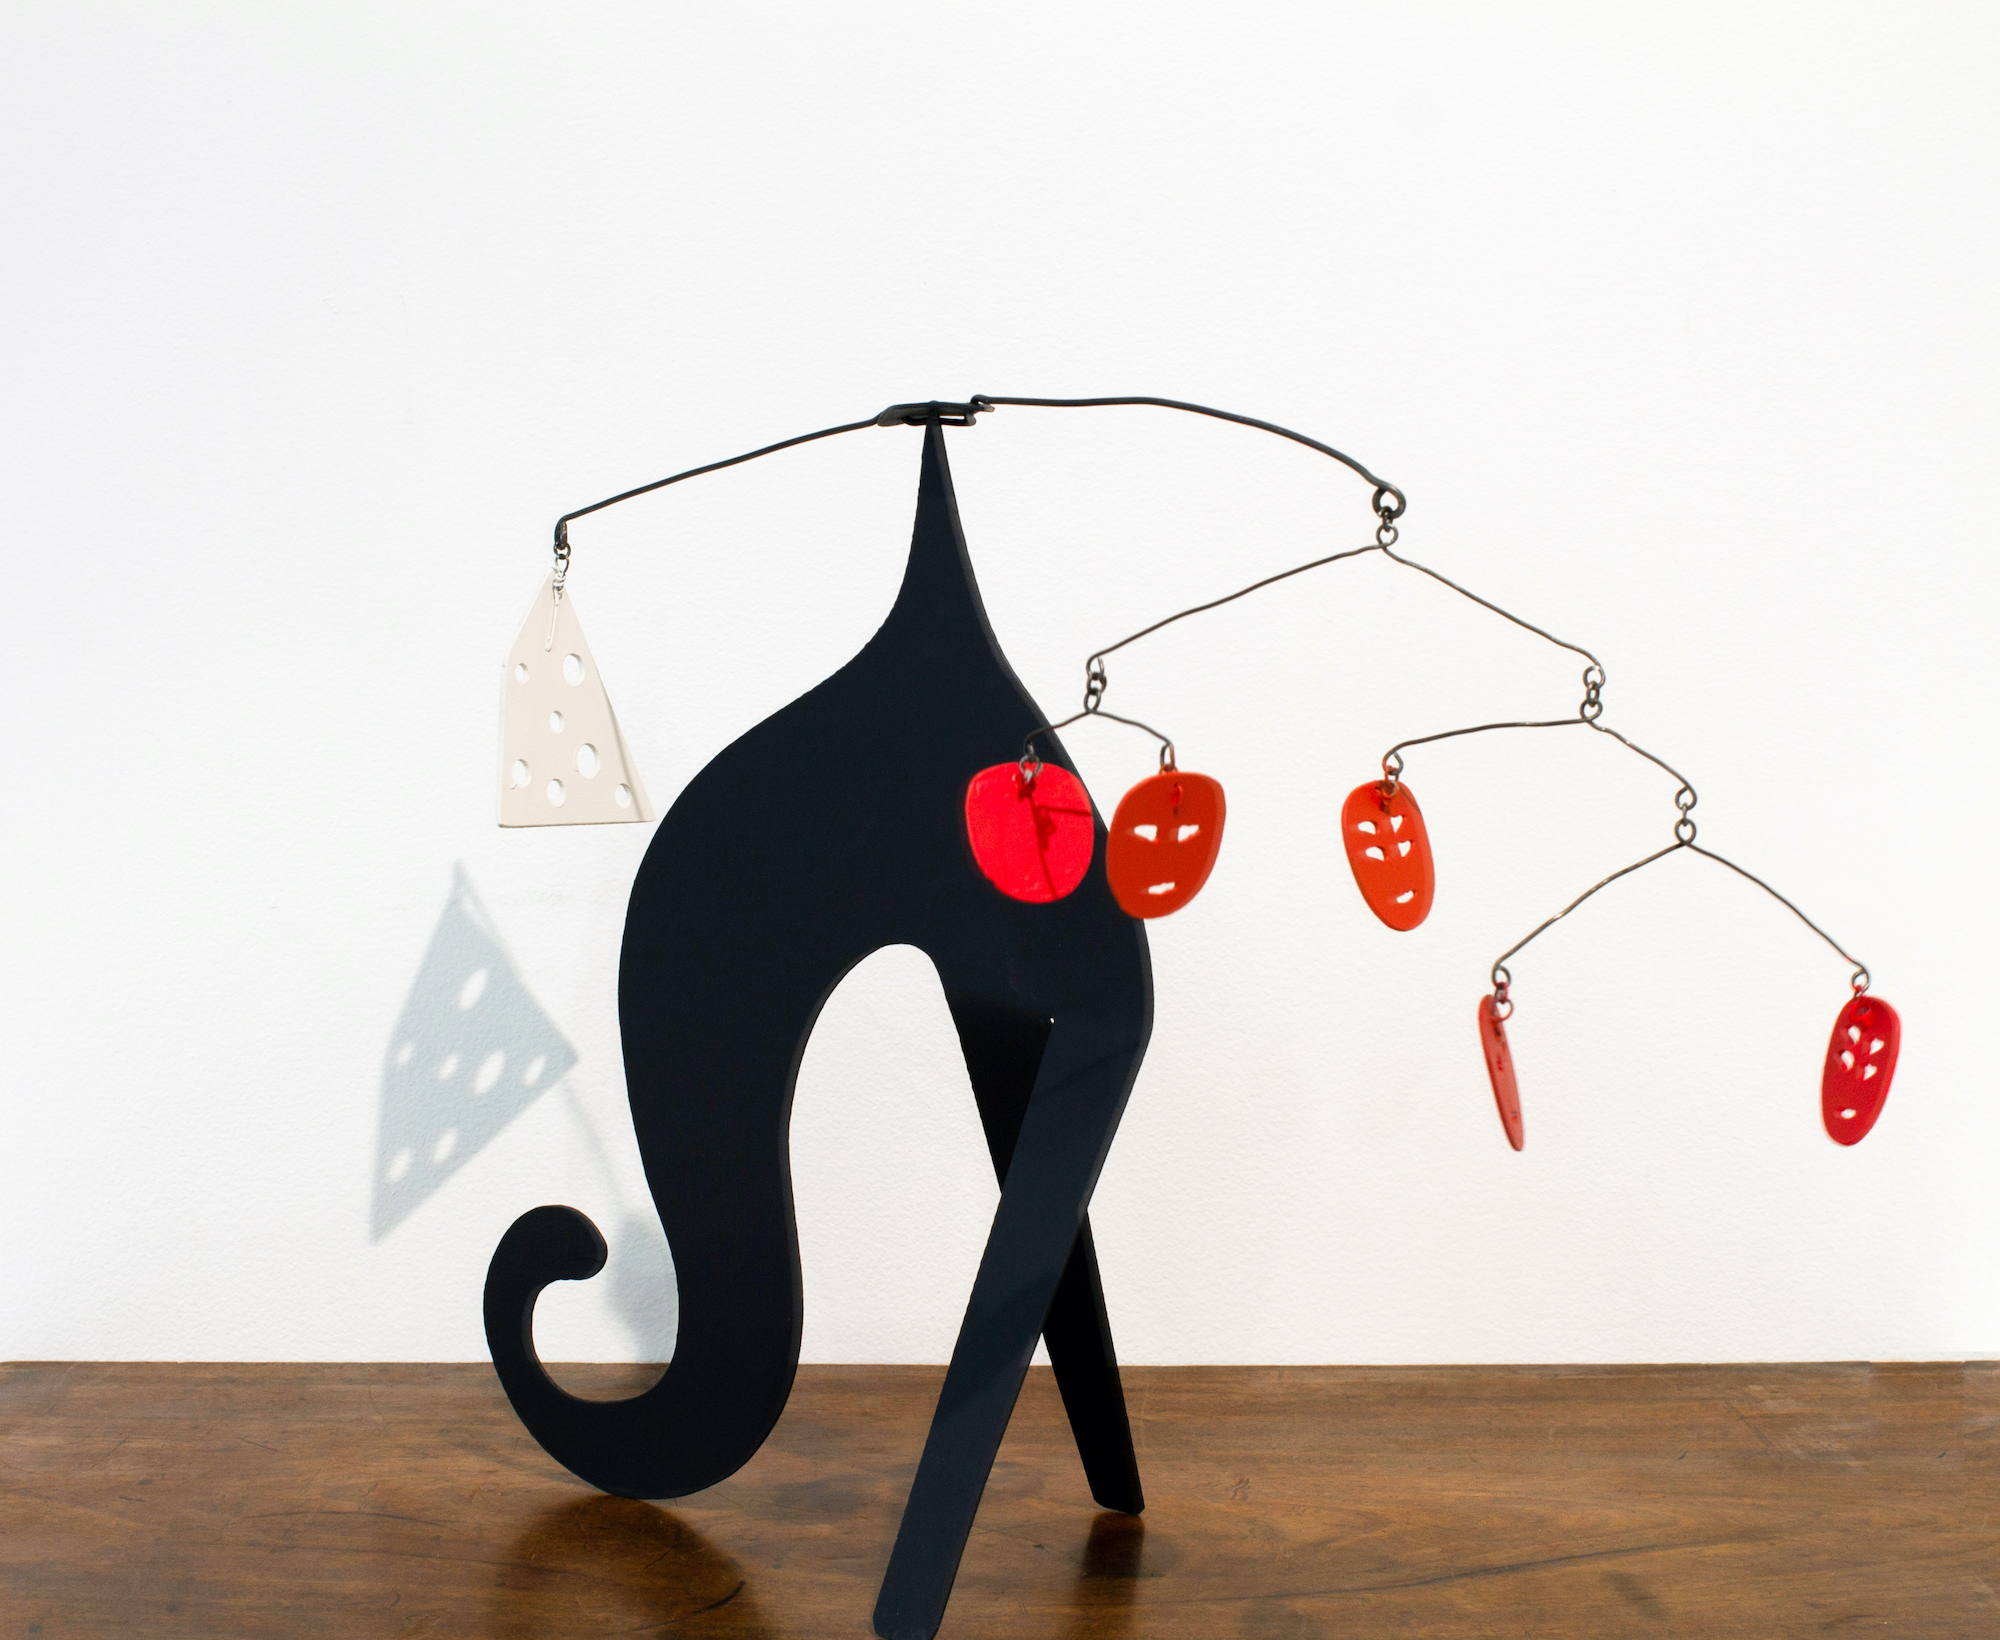 Calder-like sculpture with cat-like forms